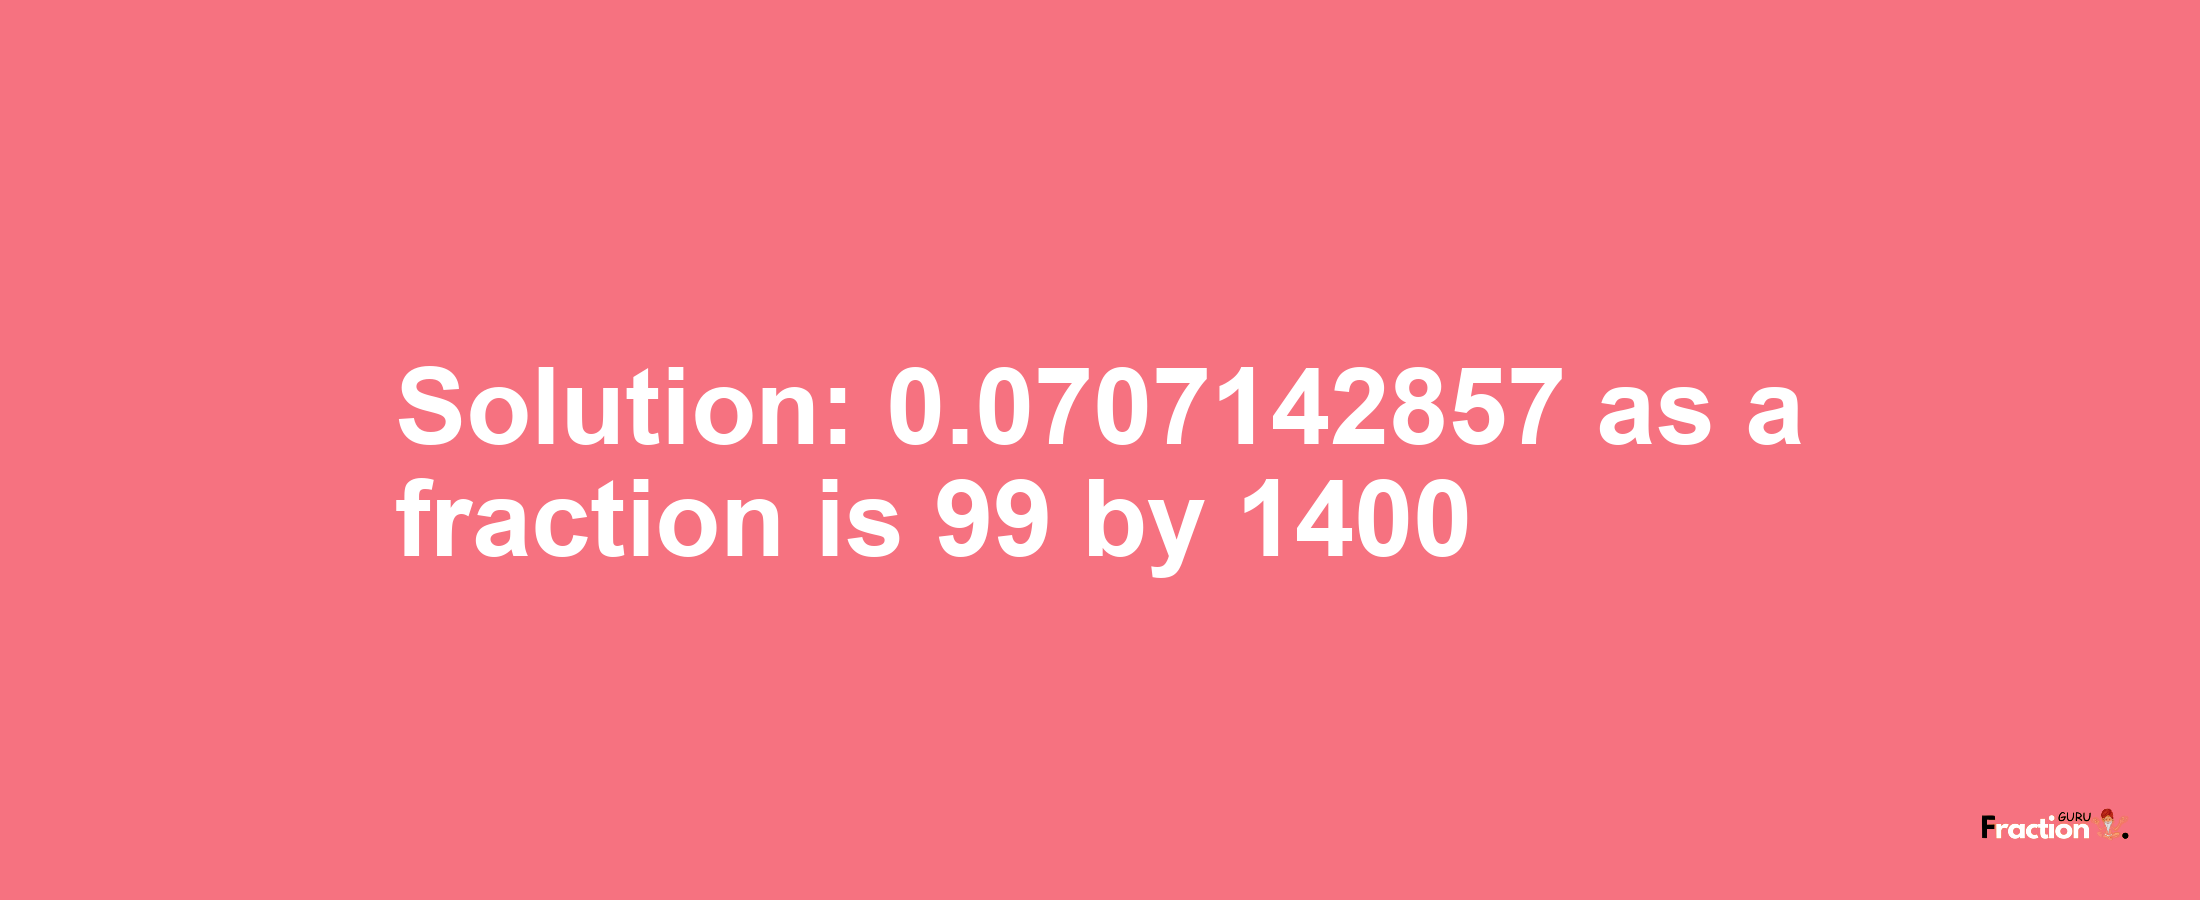 Solution:0.0707142857 as a fraction is 99/1400